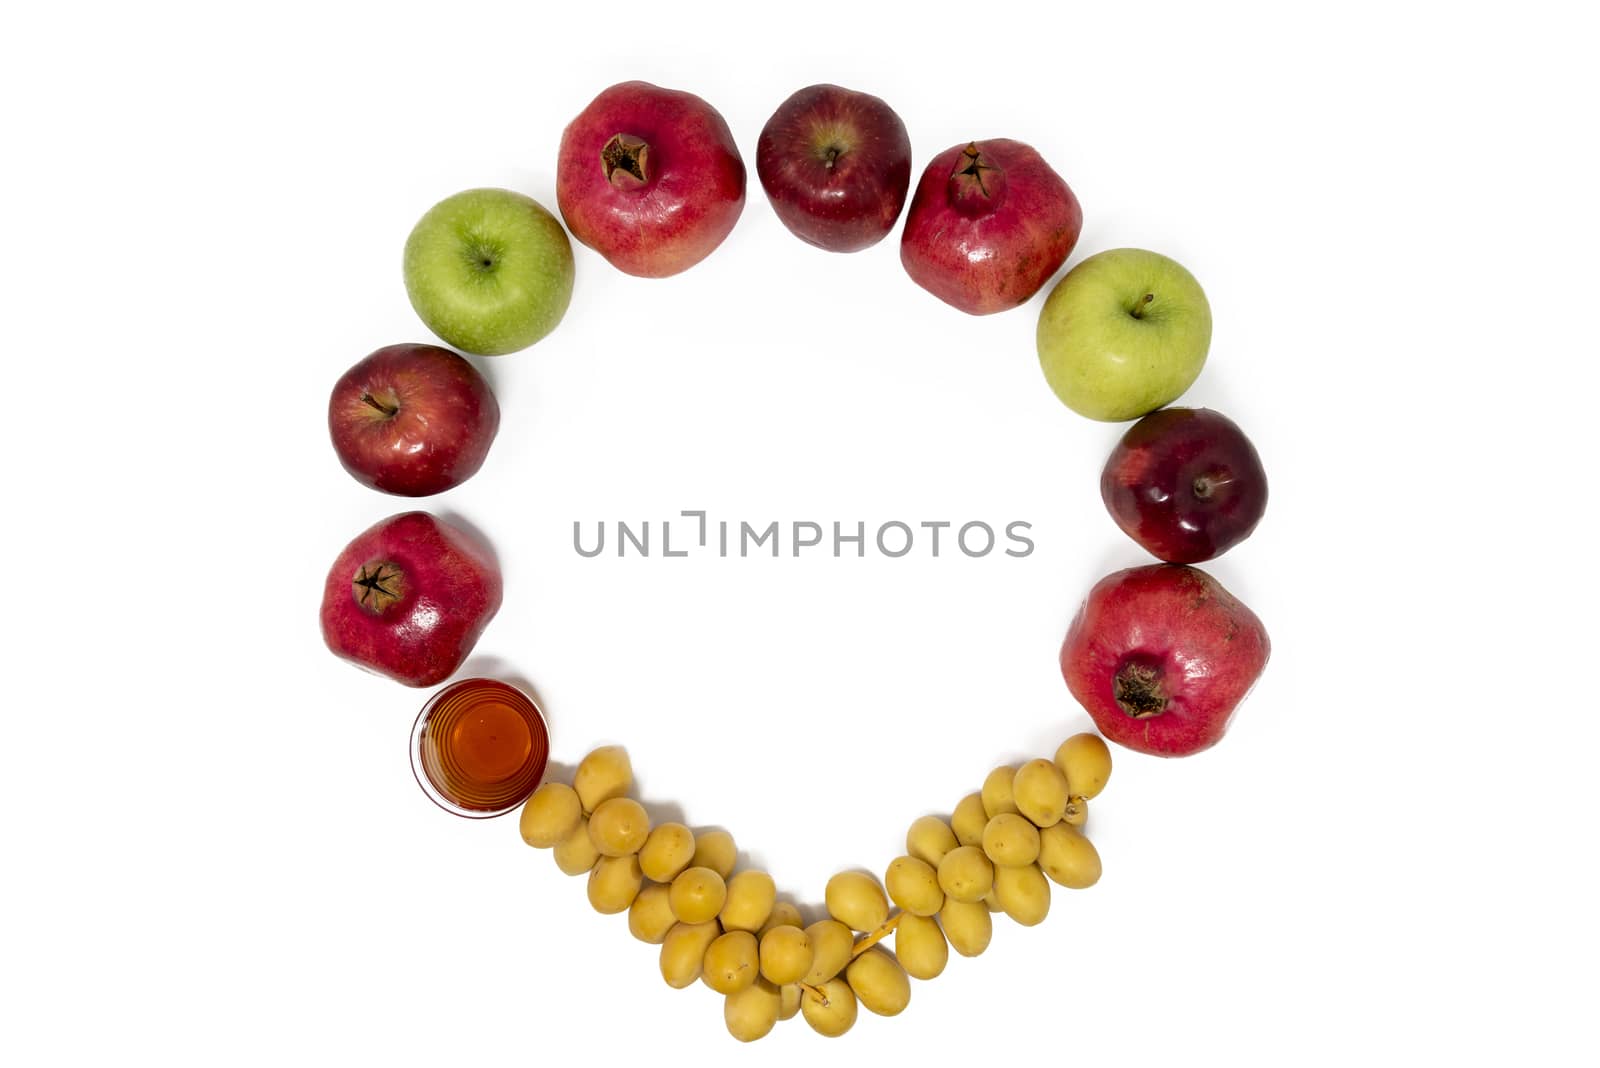 Rosh Hashanah (Jewish New Year) Traditional Symbols, Honey in a glass jar, Pomegranates, Dates, Red And Green Apples. Isolated On A White Background